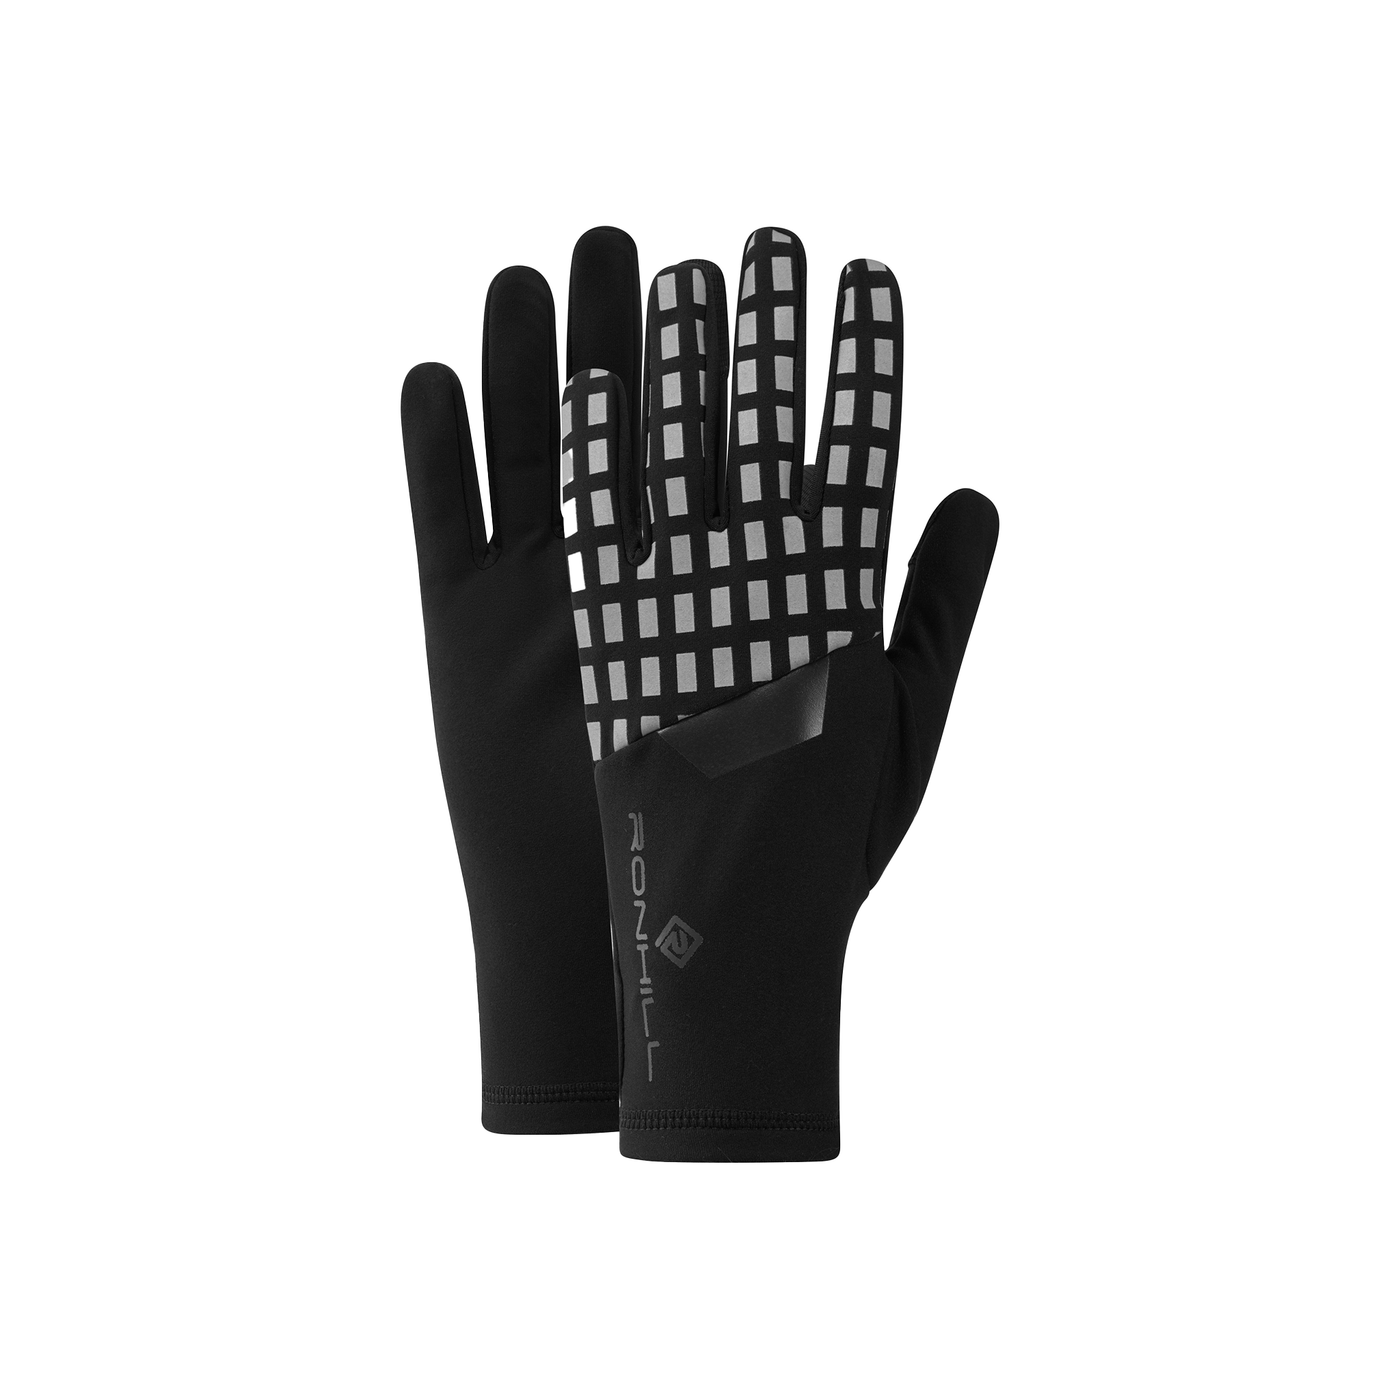 RonHill Afterhours Glove - Black/Bright White/Reflect